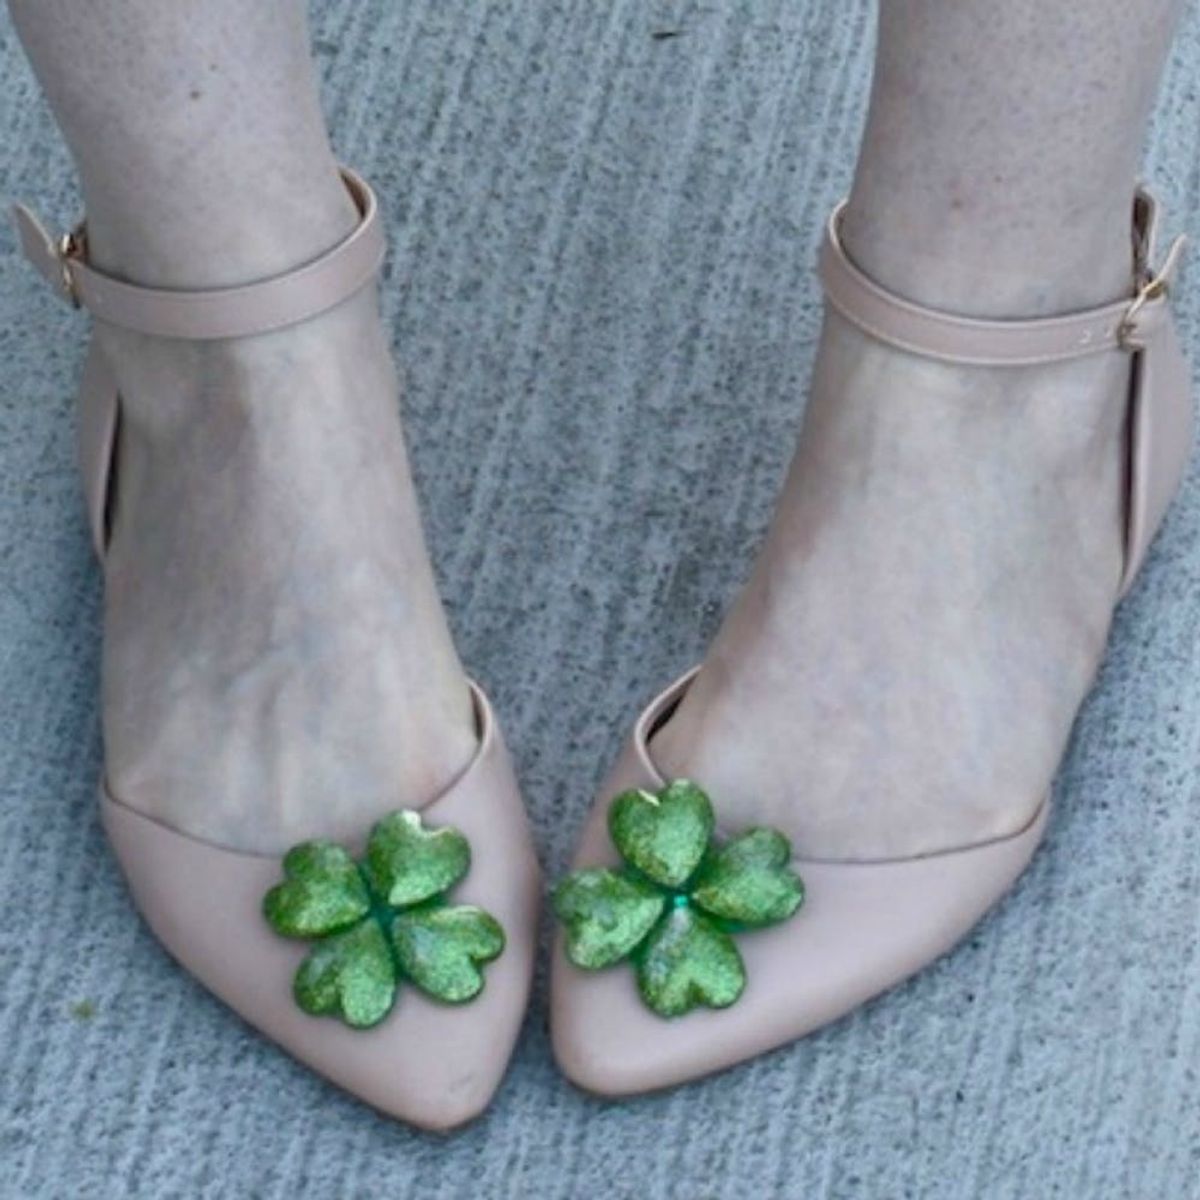 Why You Should Wear Some Green on St. Patrick’s Day